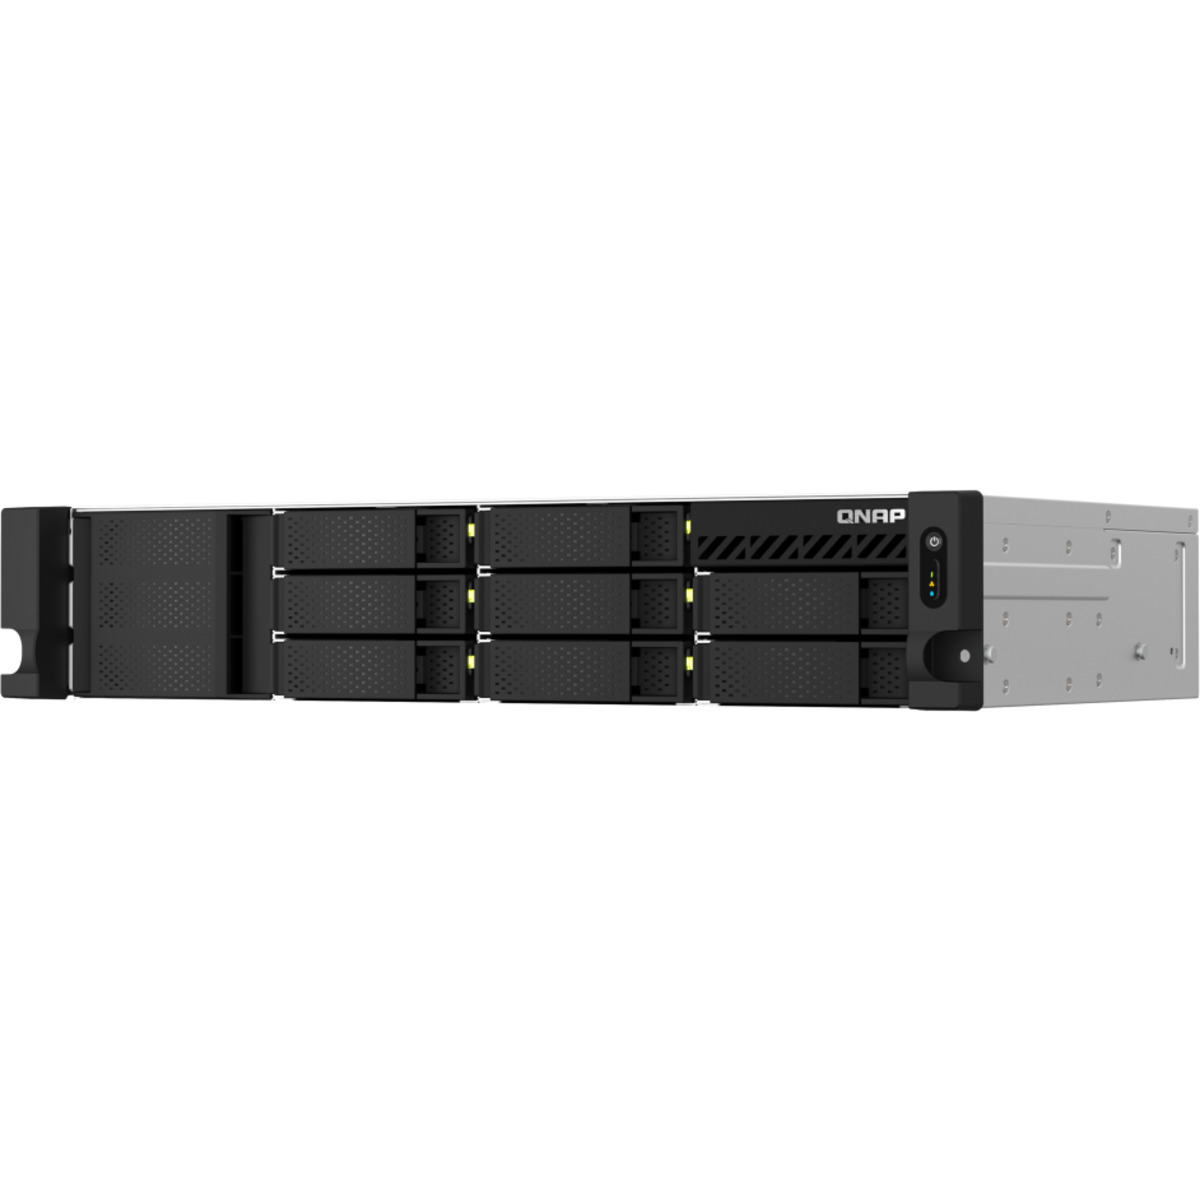 QNAP TS-864eU-RP 84tb 8-Bay RackMount Multimedia / Power User / Business NAS - Network Attached Storage Device 6x14tb Seagate EXOS X18 ST14000NM000J 3.5 7200rpm SATA 6Gb/s HDD ENTERPRISE Class Drives Installed - Burn-In Tested TS-864eU-RP